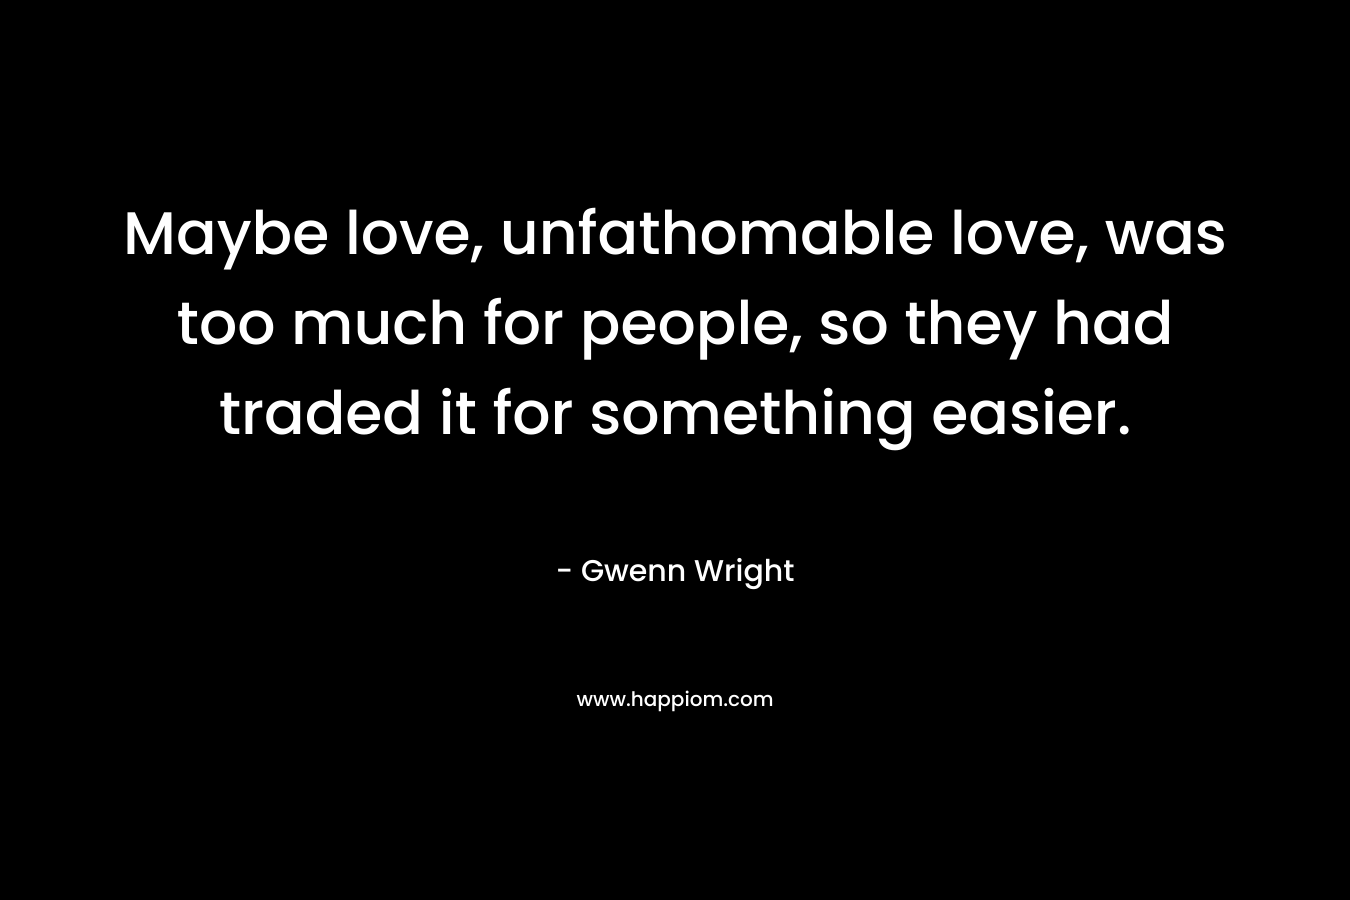 Maybe love, unfathomable love, was too much for people, so they had traded it for something easier.